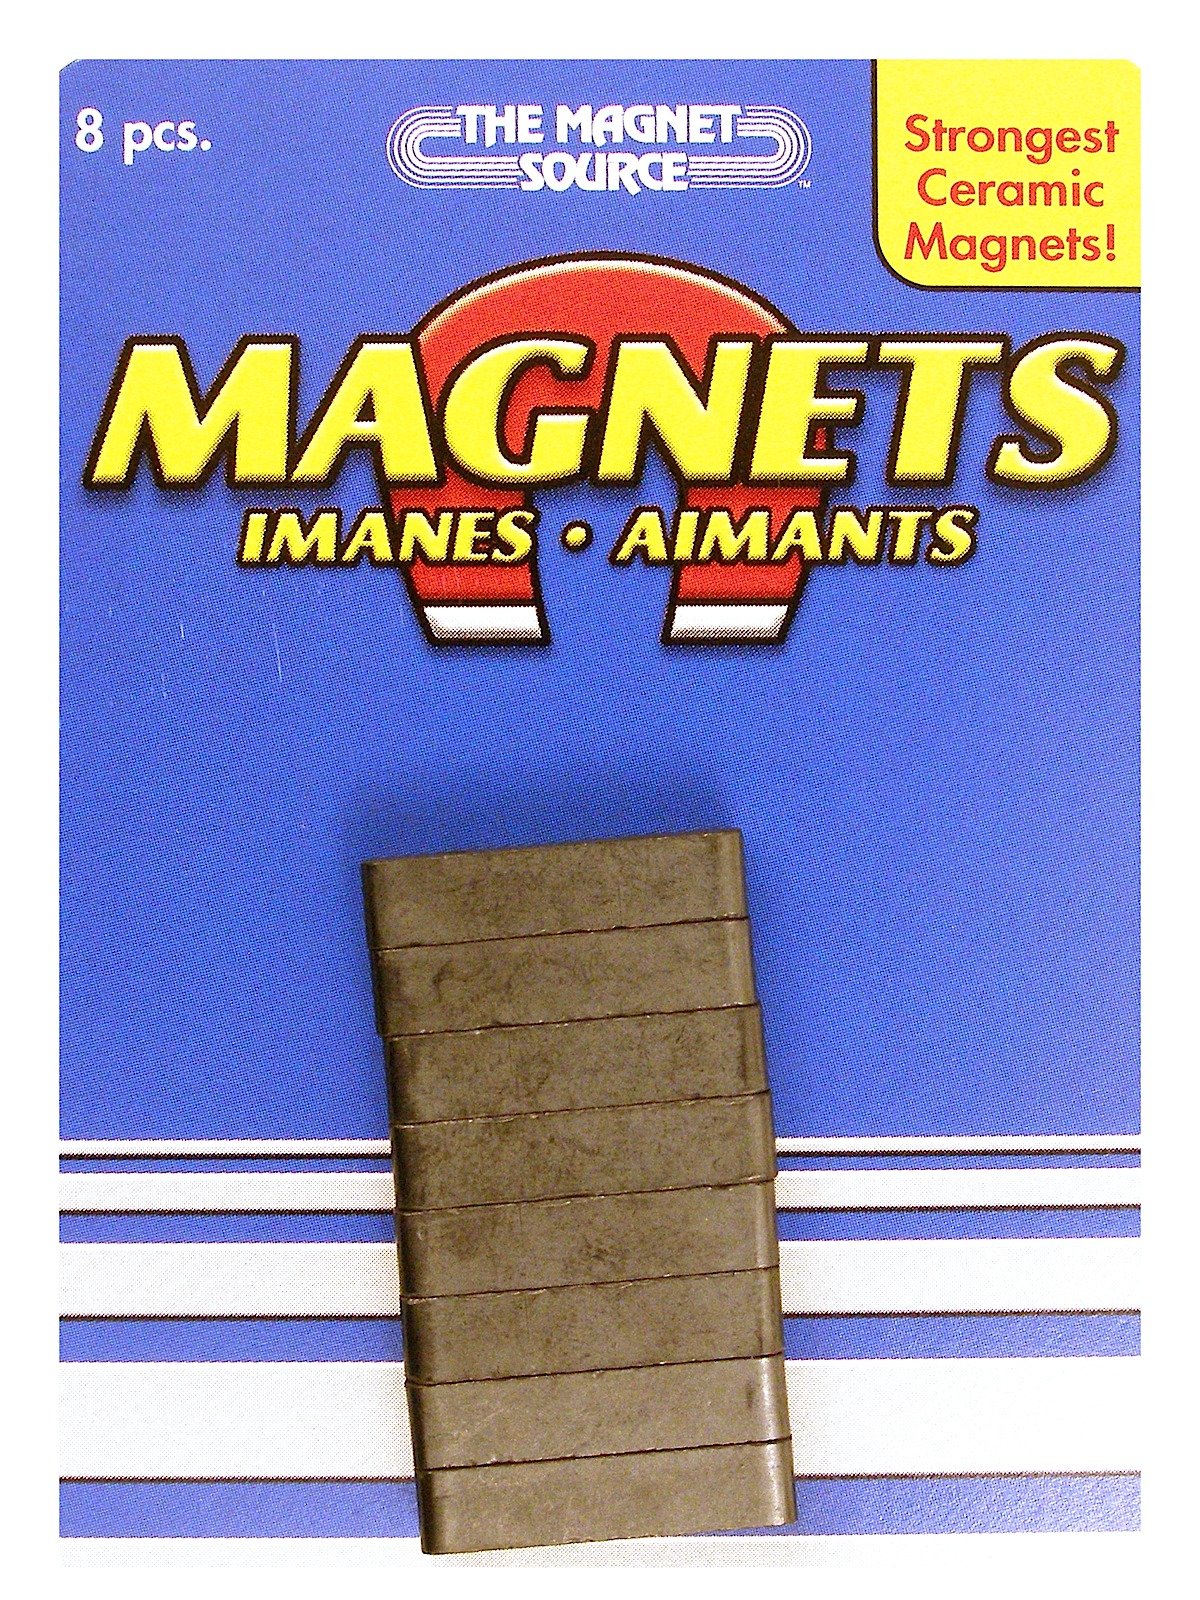 The Magnet Source - Ceramic Magnets